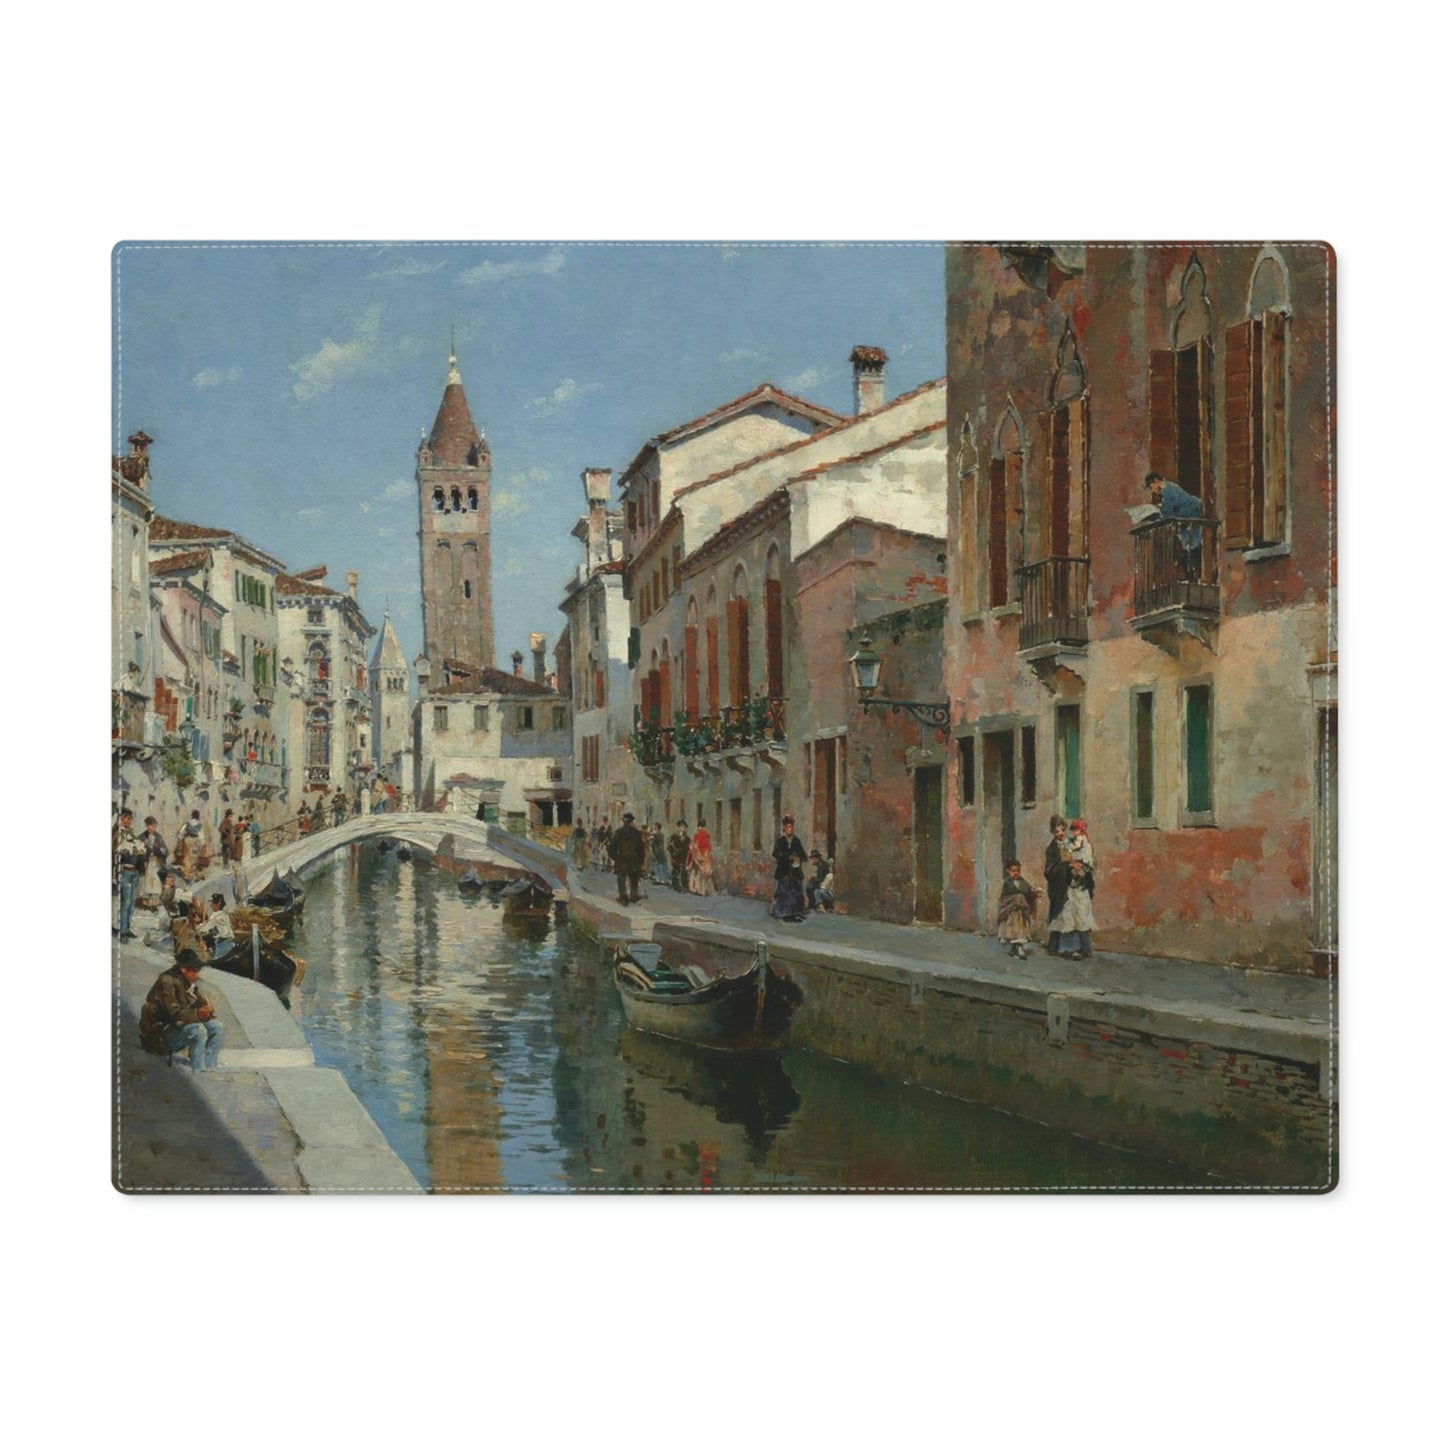 Federico del Campo: "Looking East on the Rio di San Barnaba" - Placemat, 1pc